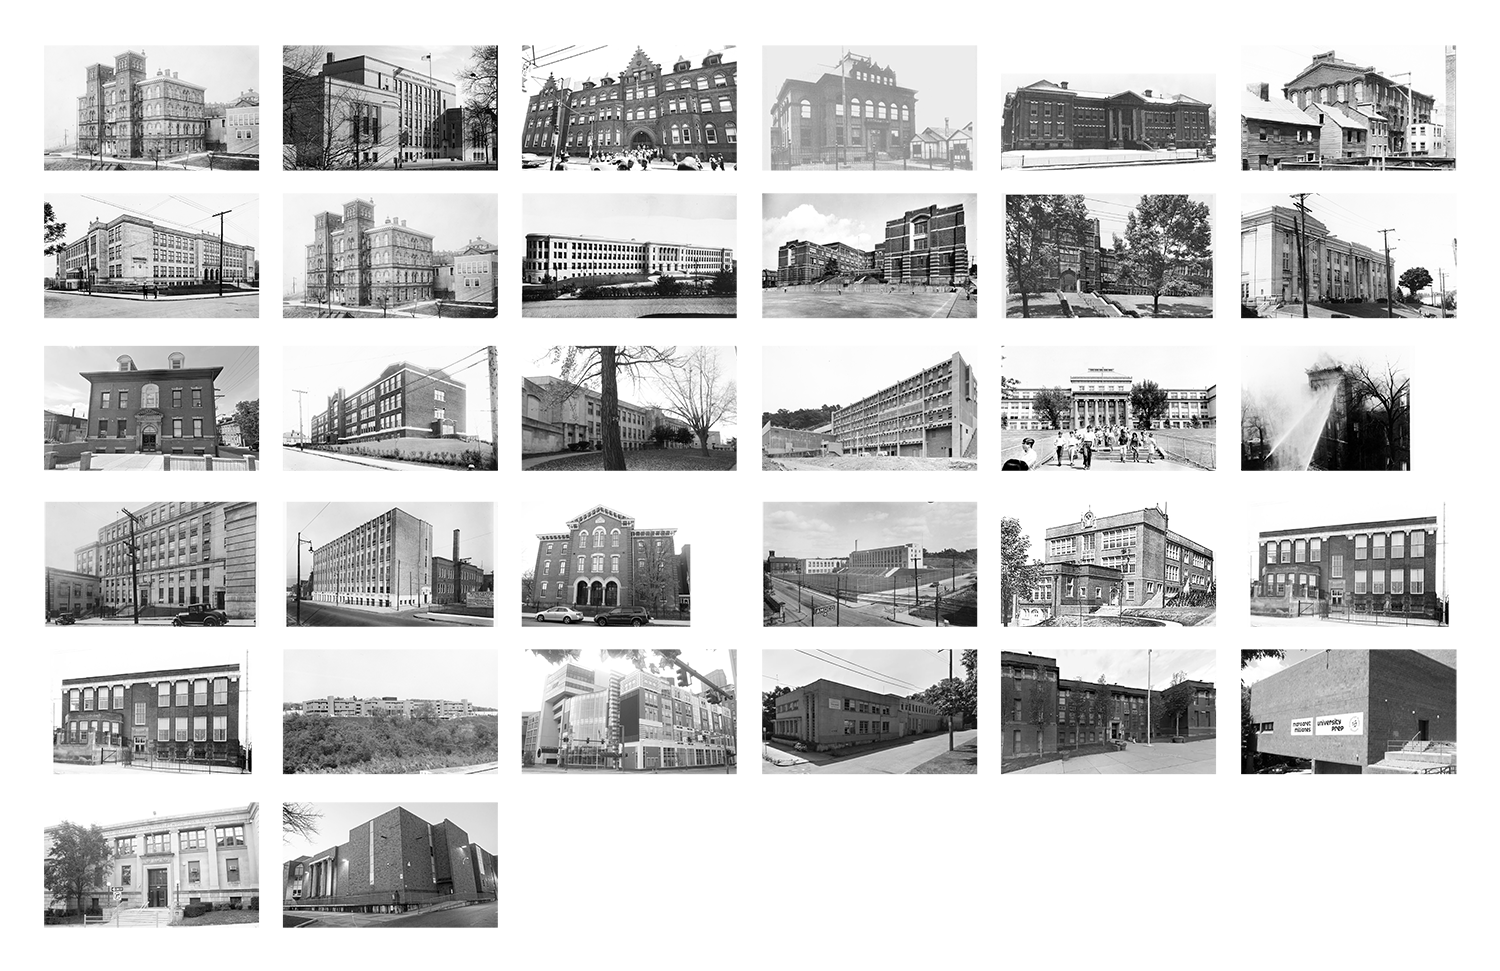 Composite image depicting 21 historic images of public high schools in Pittsburgh in a tile format.